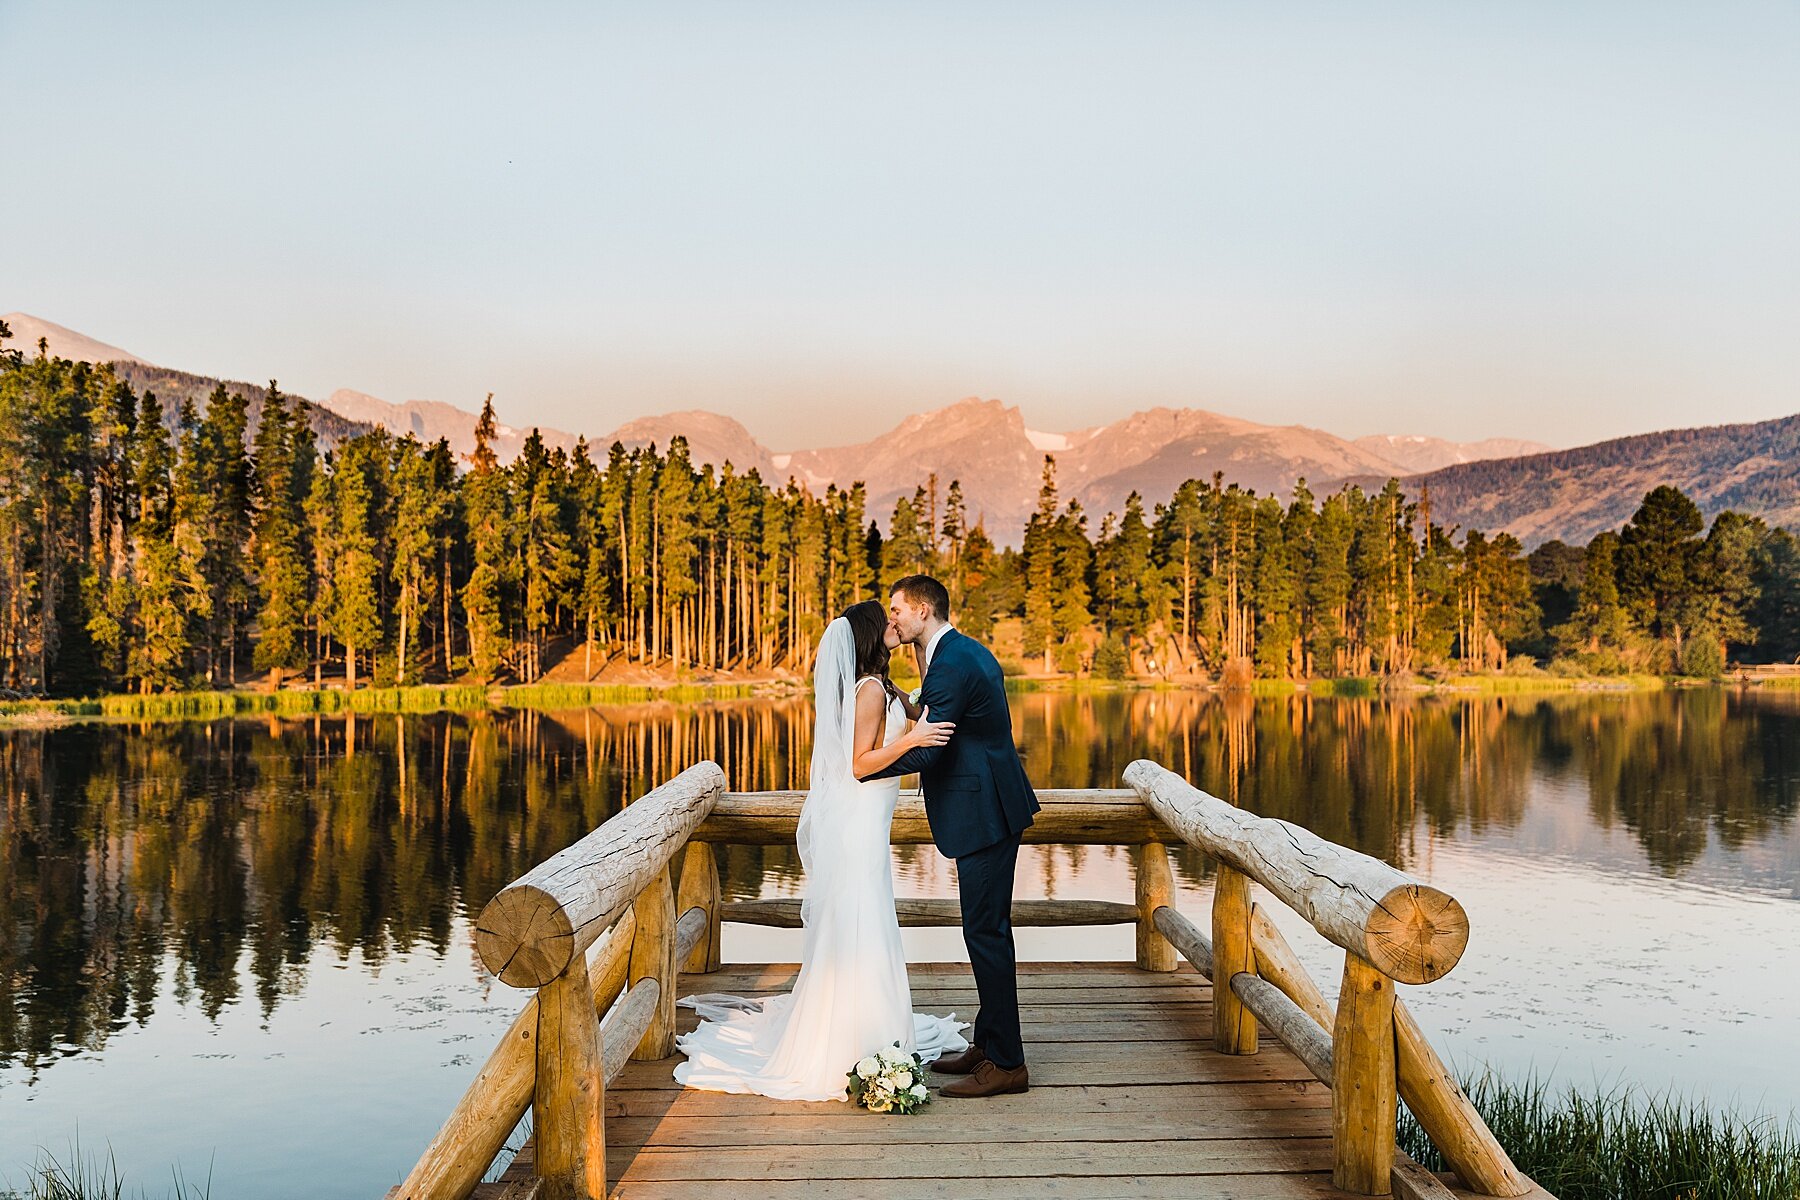 Sunrise Elopement at Sprague Lake in Rocky Mountain National Park | Colorado Elopement Photographer | Vow of the Wild